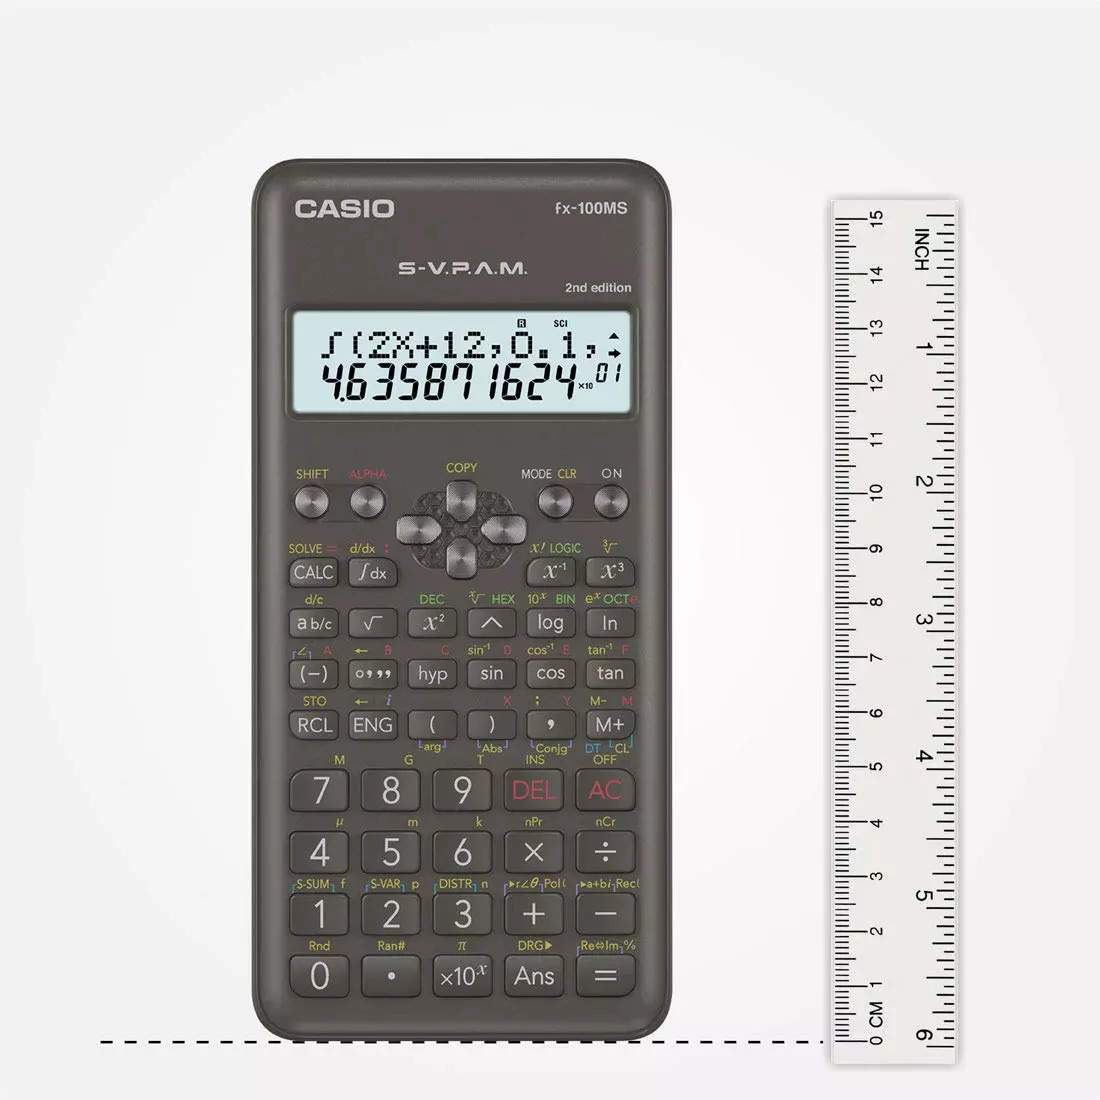 CasioFX-100MS2ndEd.ScientificCalculator